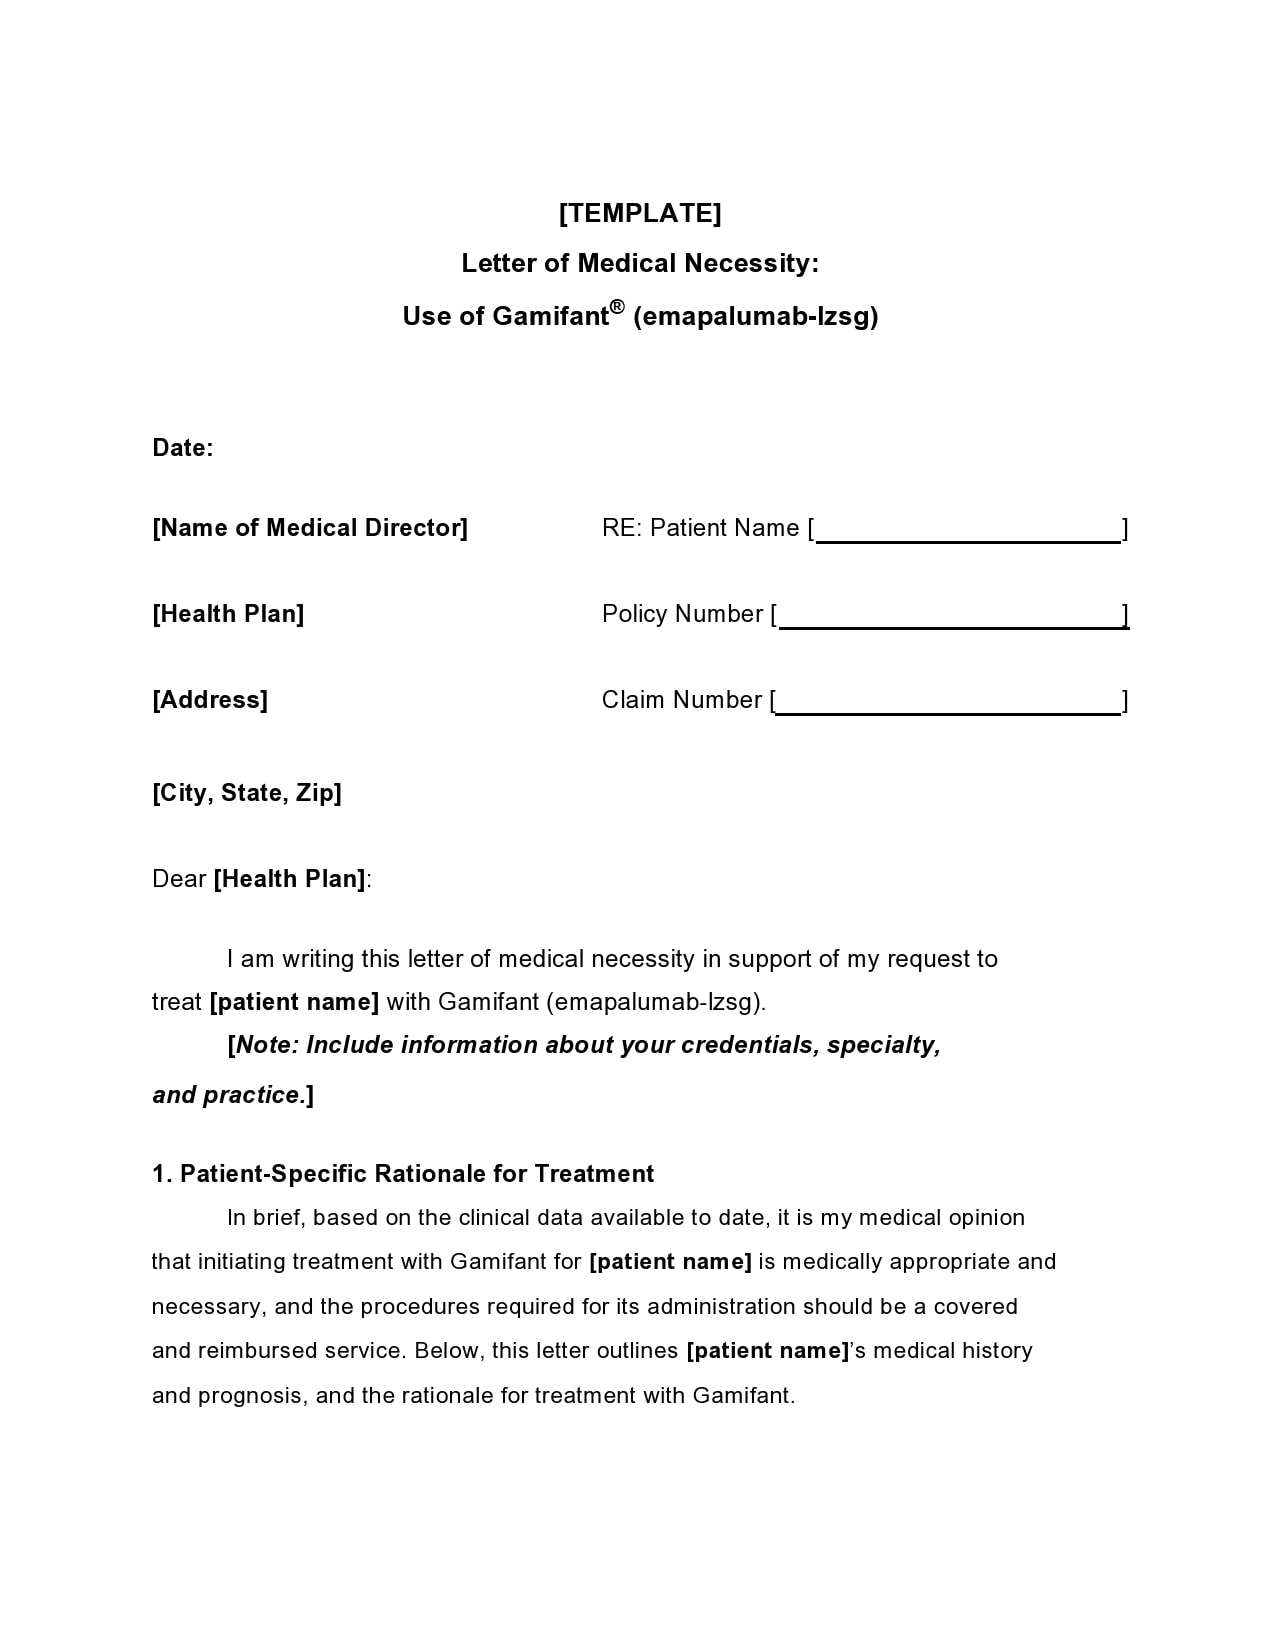 40 Best Letter of Medical Necessity Templates (& Examples)